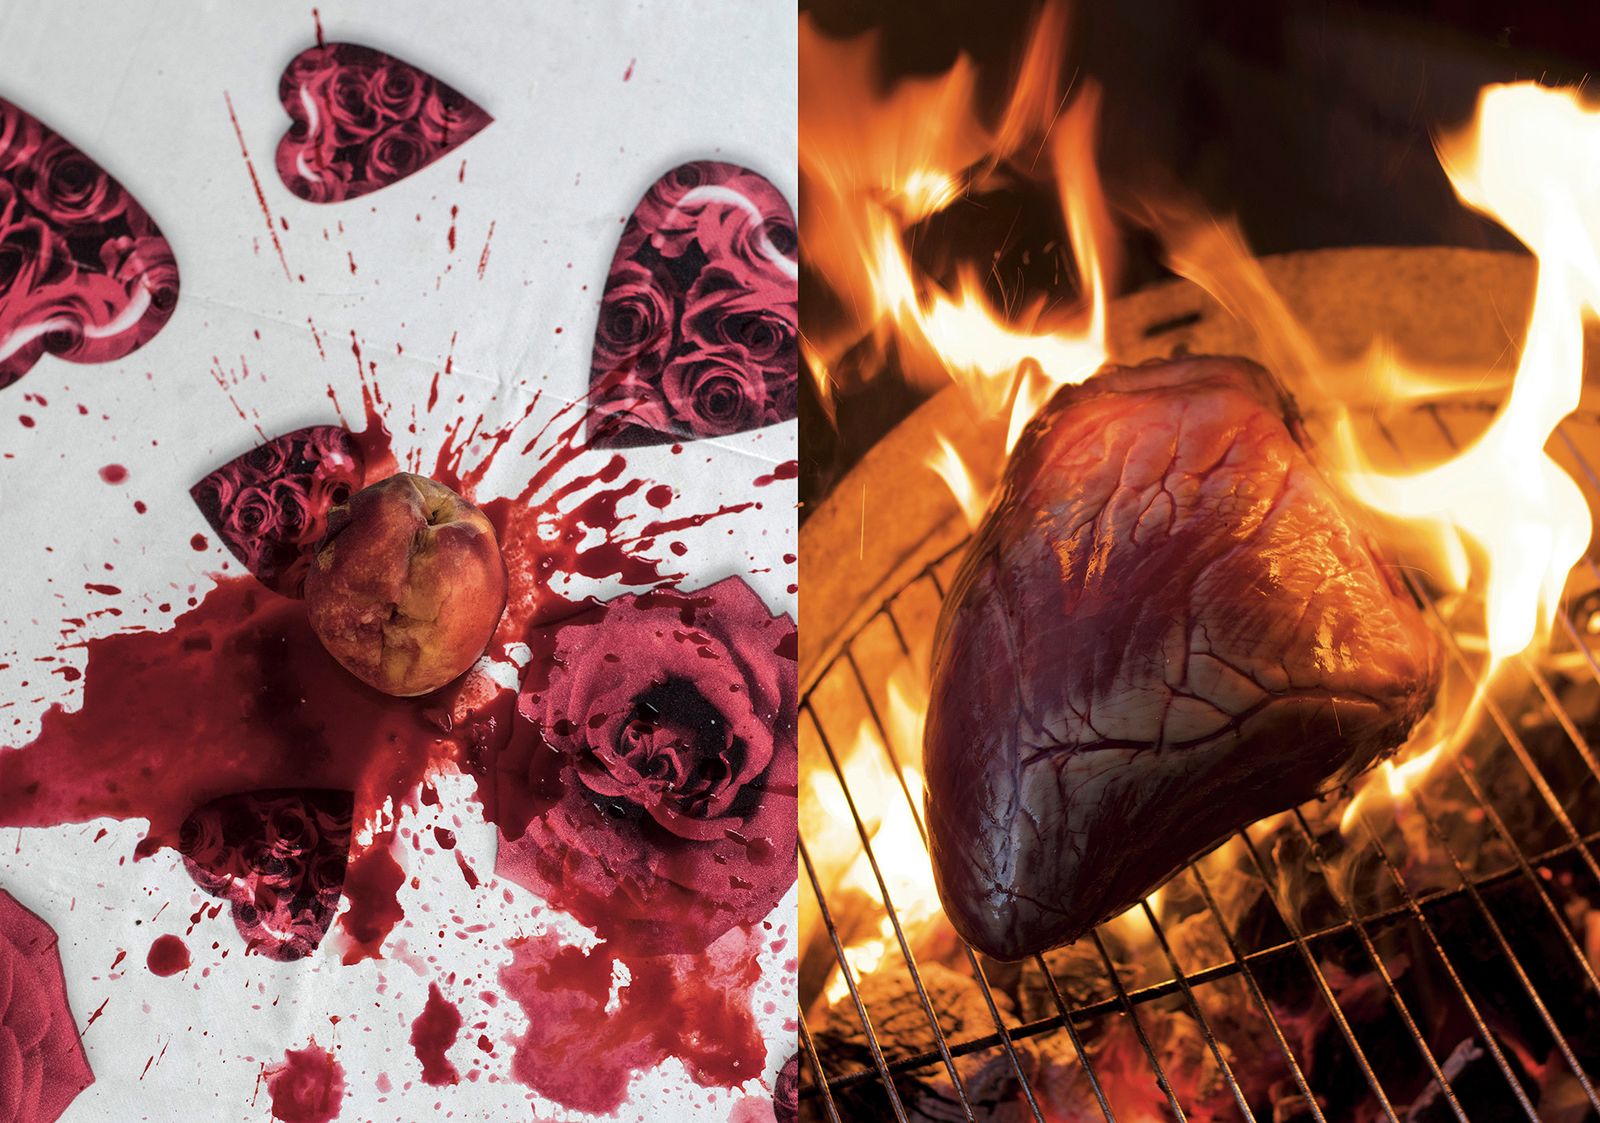 © Luis Cobelo - The peach and the heartI left my burning heart behind, and a smashed peach. They are both bloody juicy.